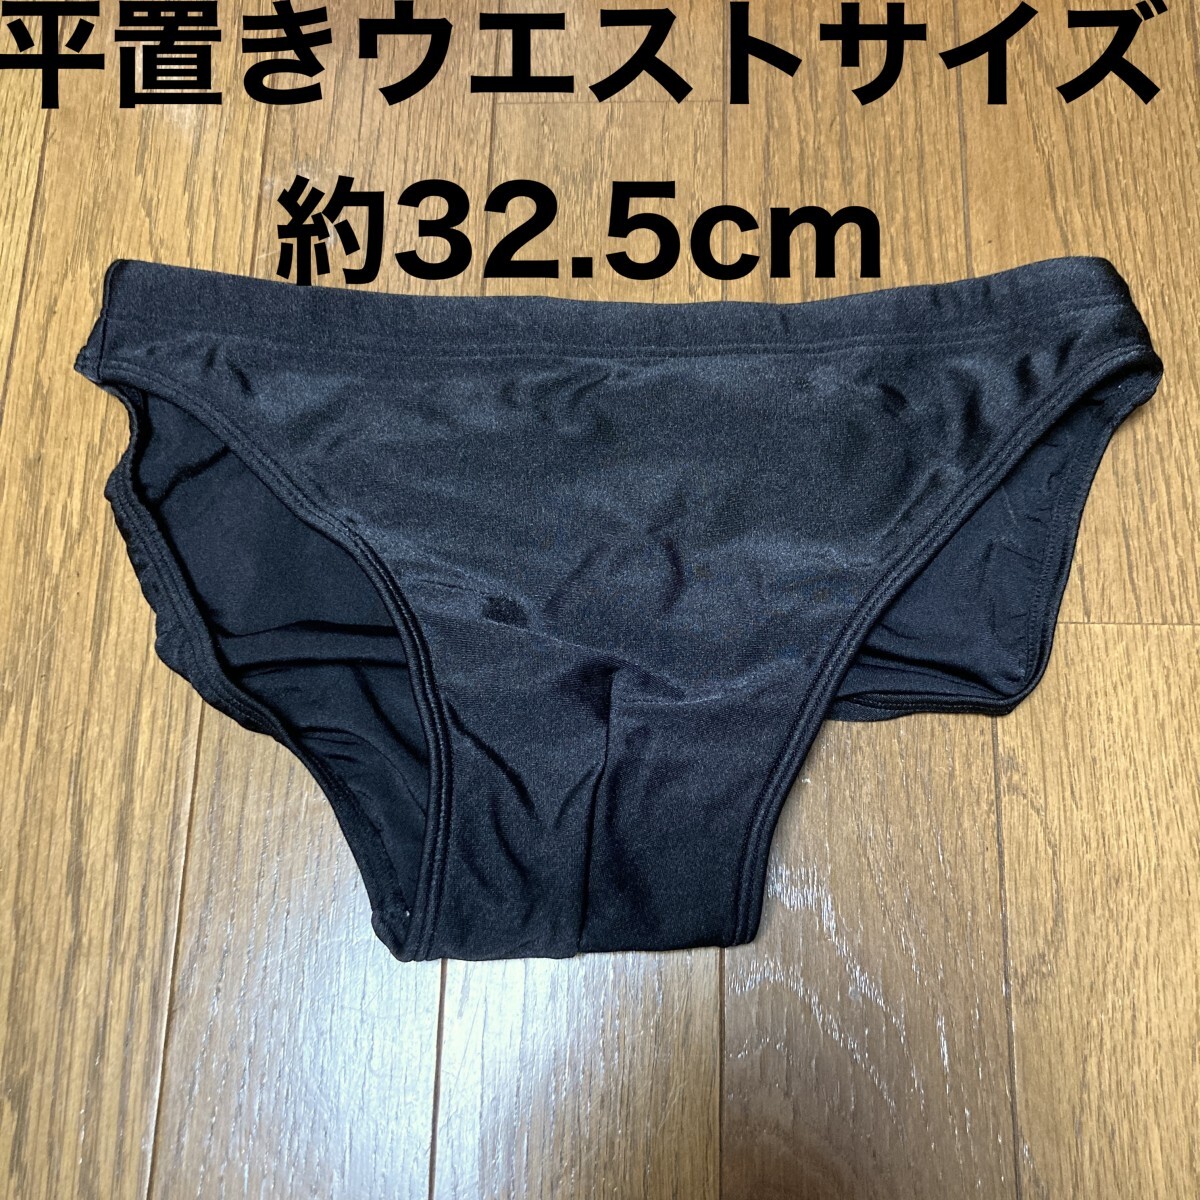 C860 stretch! simple black. man ... swimsuit! under . collection . training also! size M rank 